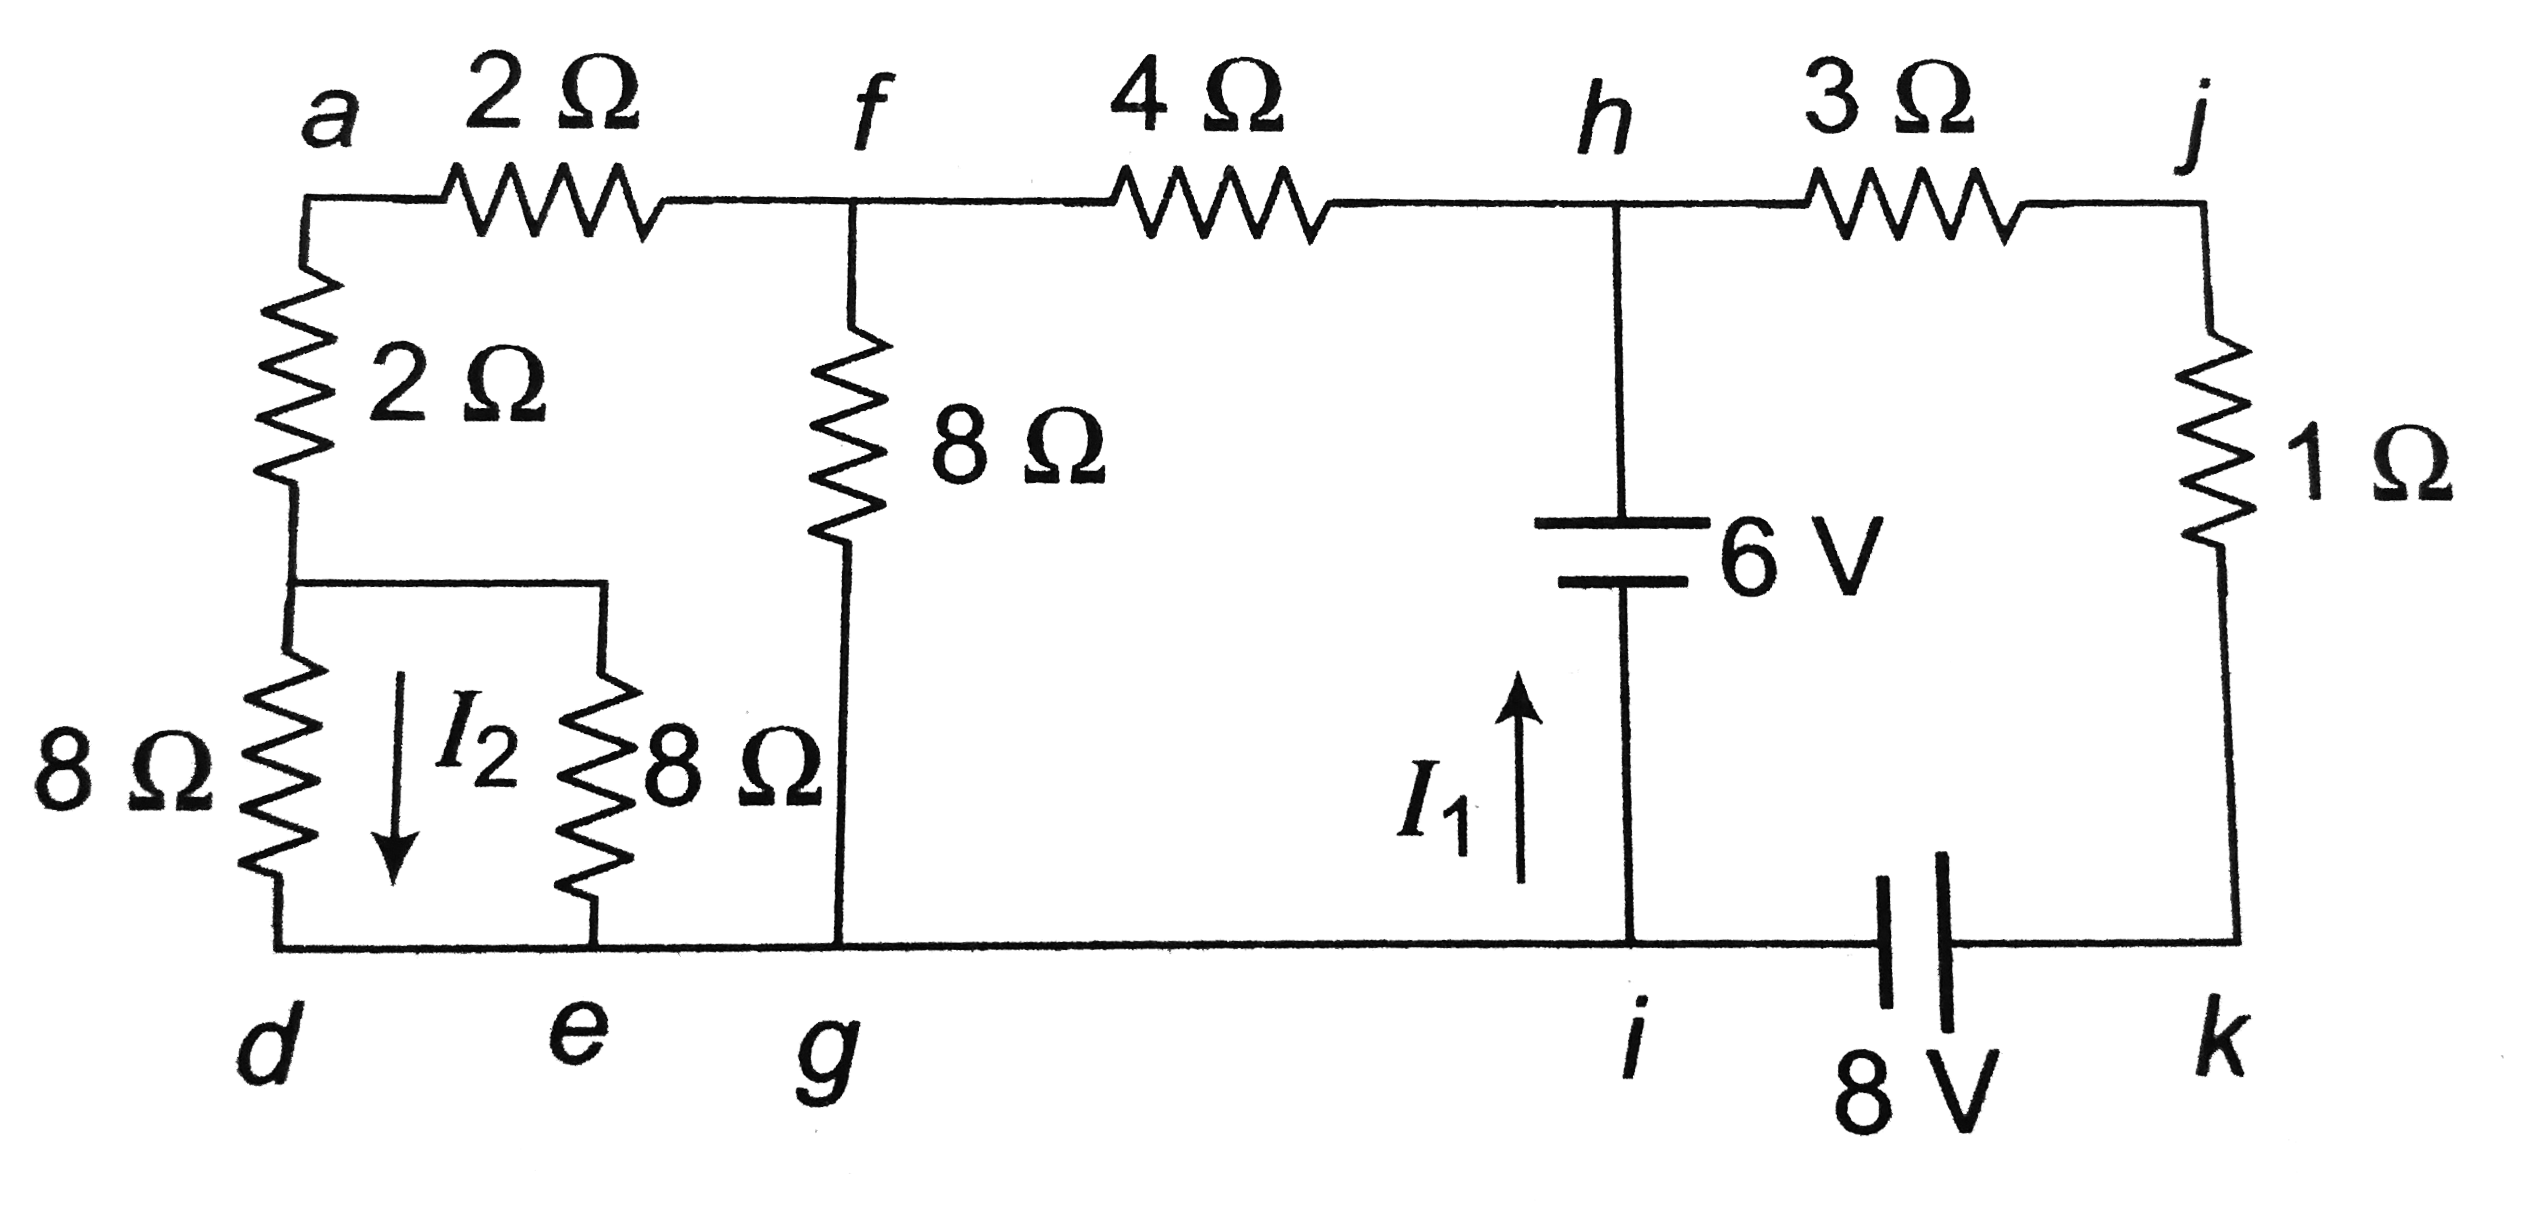 The circuit is shown in figure. The ratio of current i(1) // i(2) is